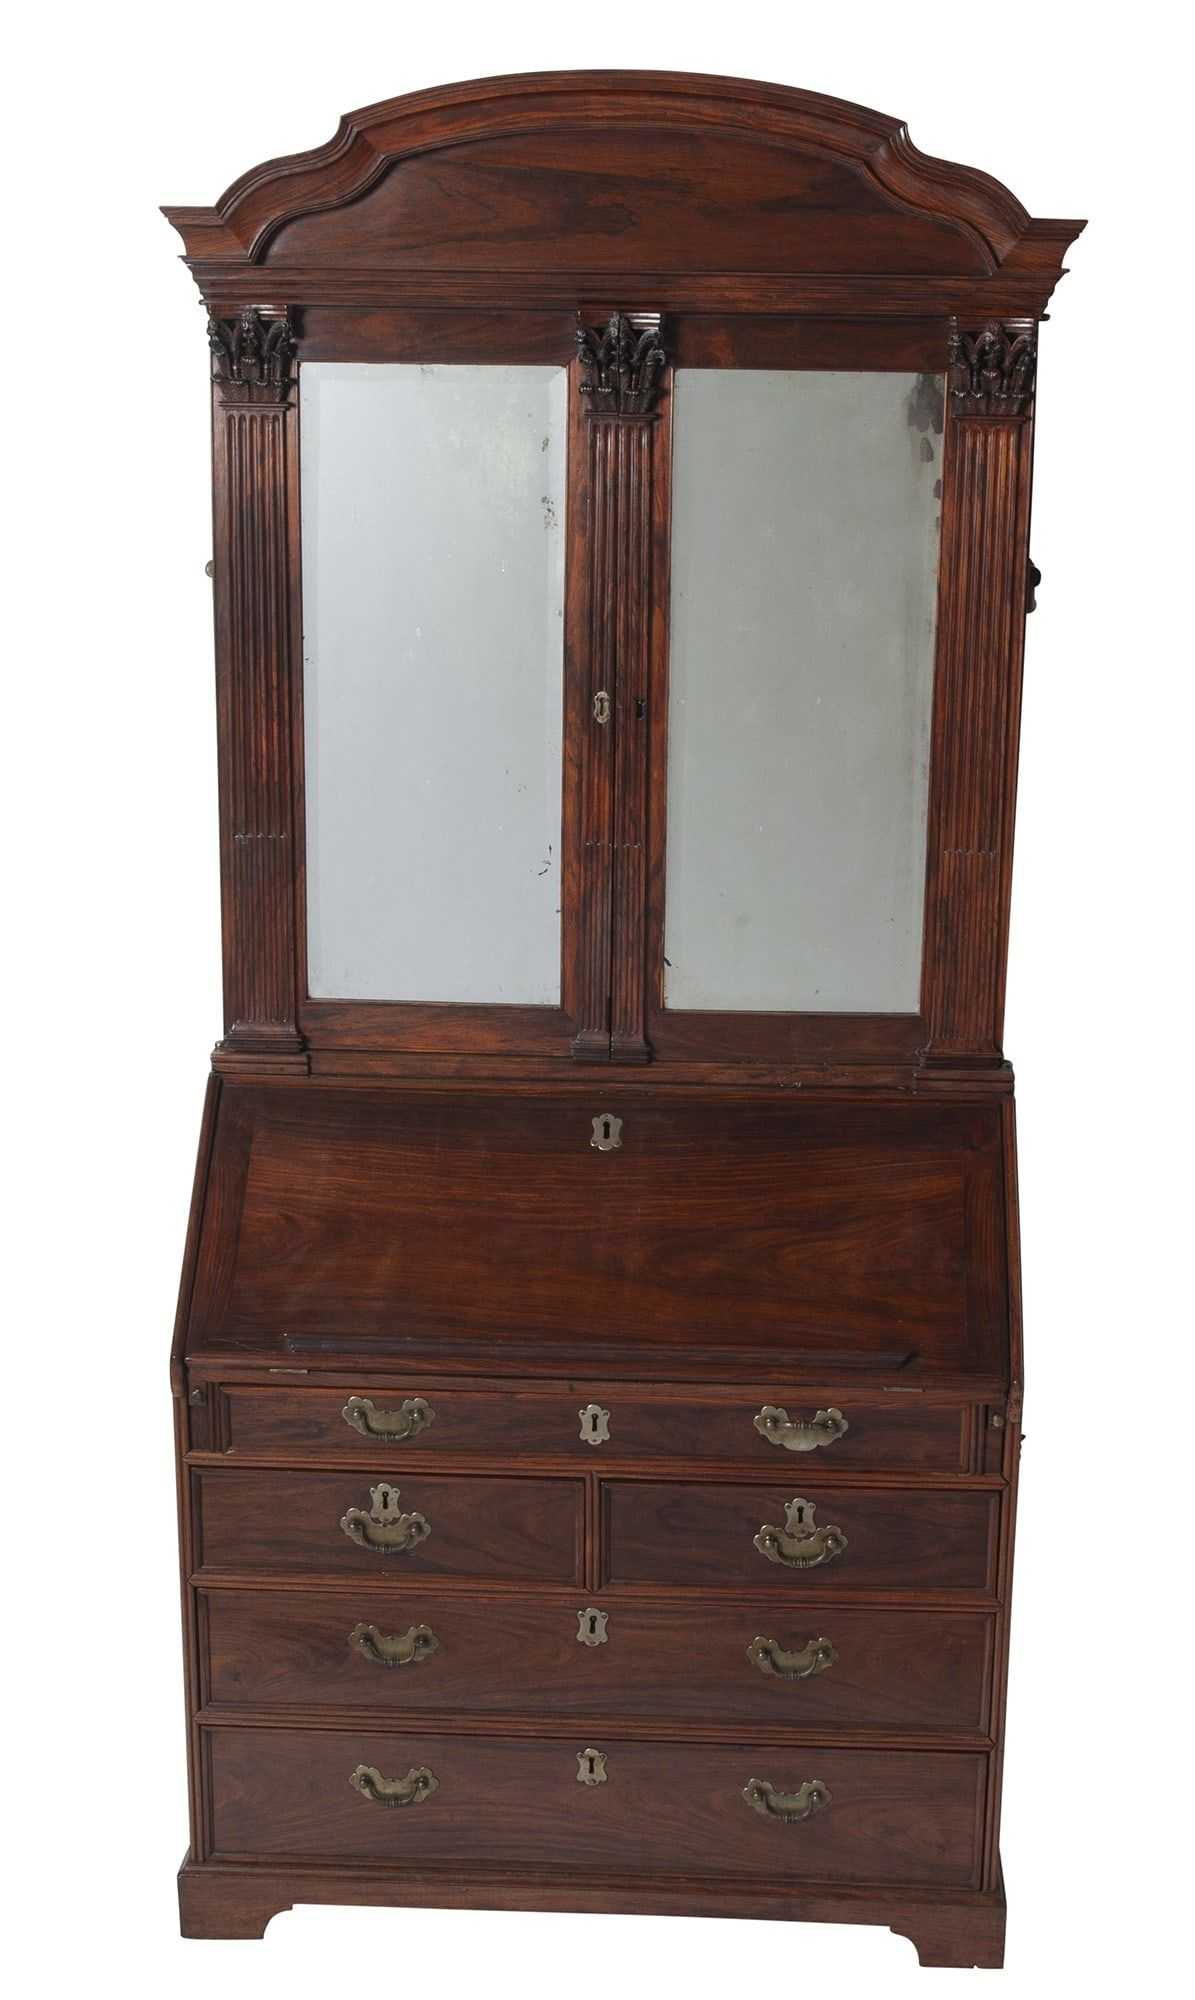 Chinese Export huanghuali secretary bookcase, which hammered for $47,500 and sold for $63,175 with buyer’s premium at Doyle New York March 20.